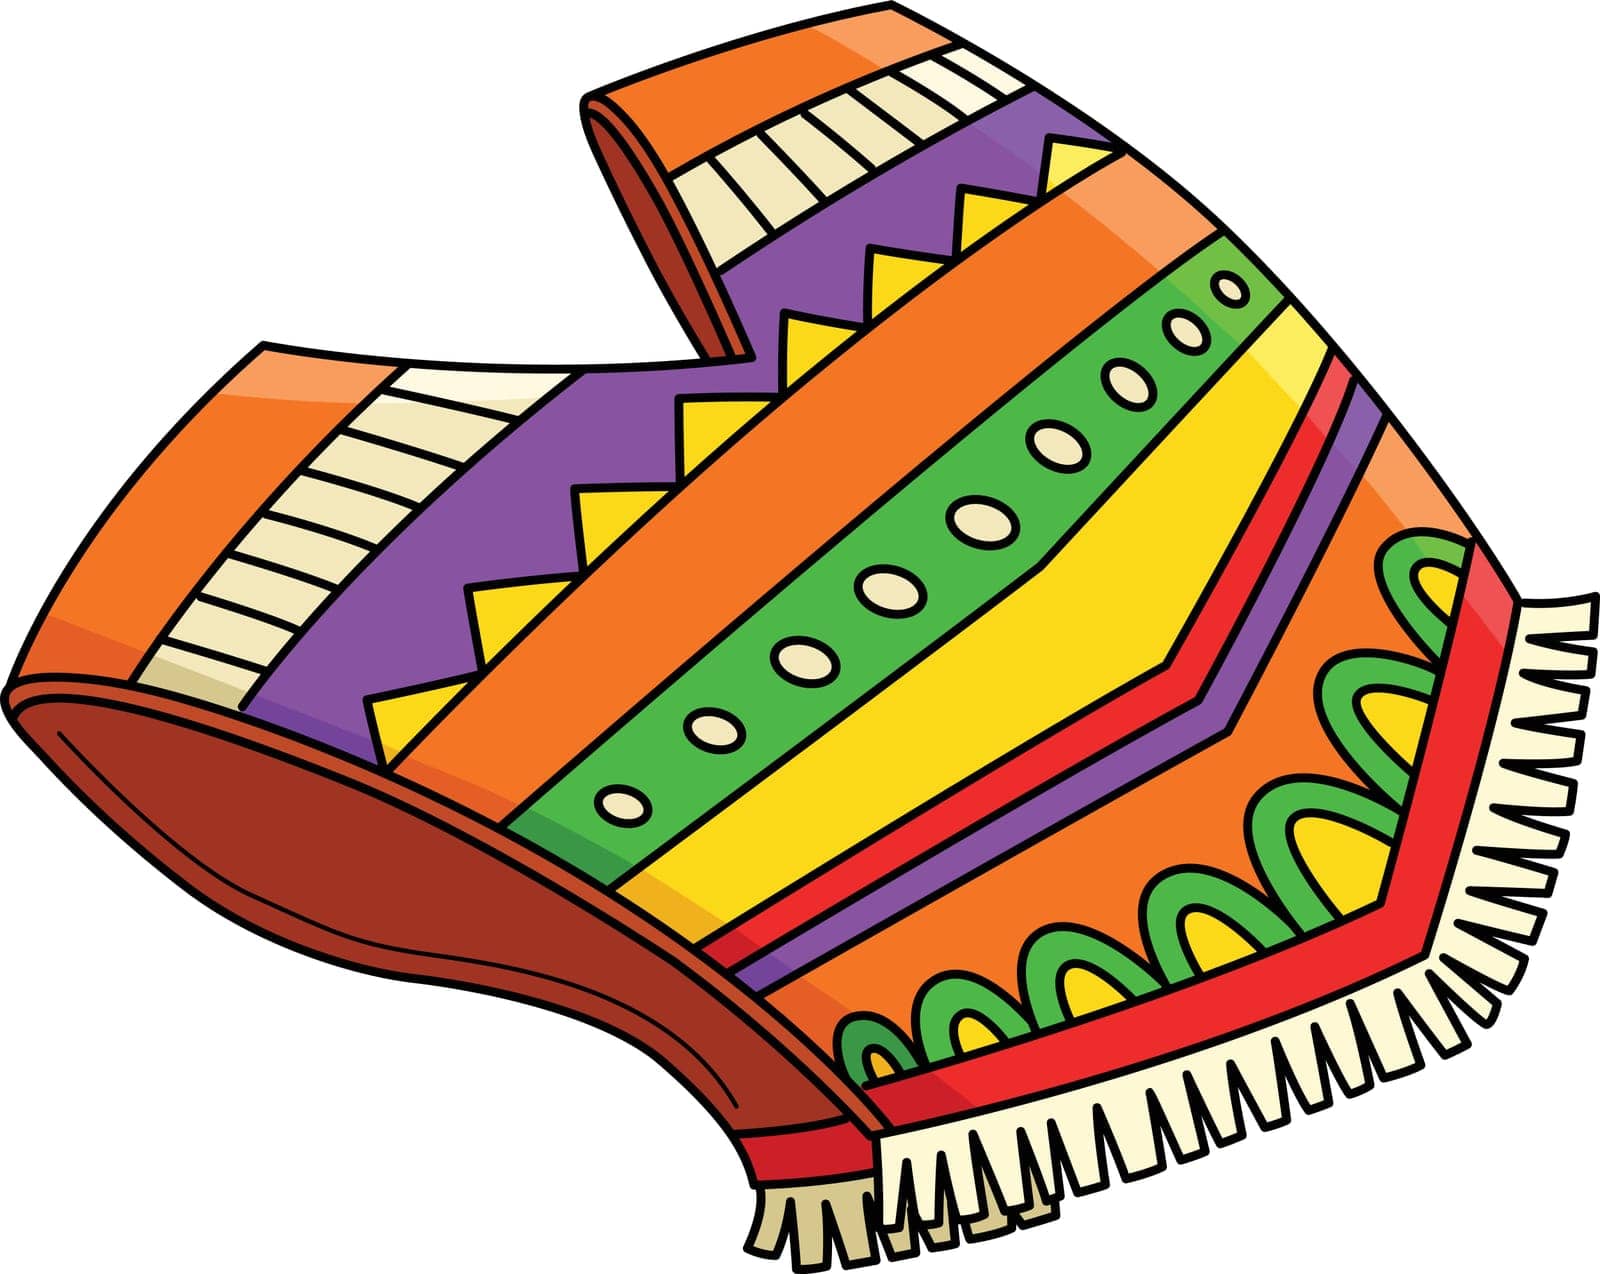 This cartoon clipart shows a Poncho illustration.